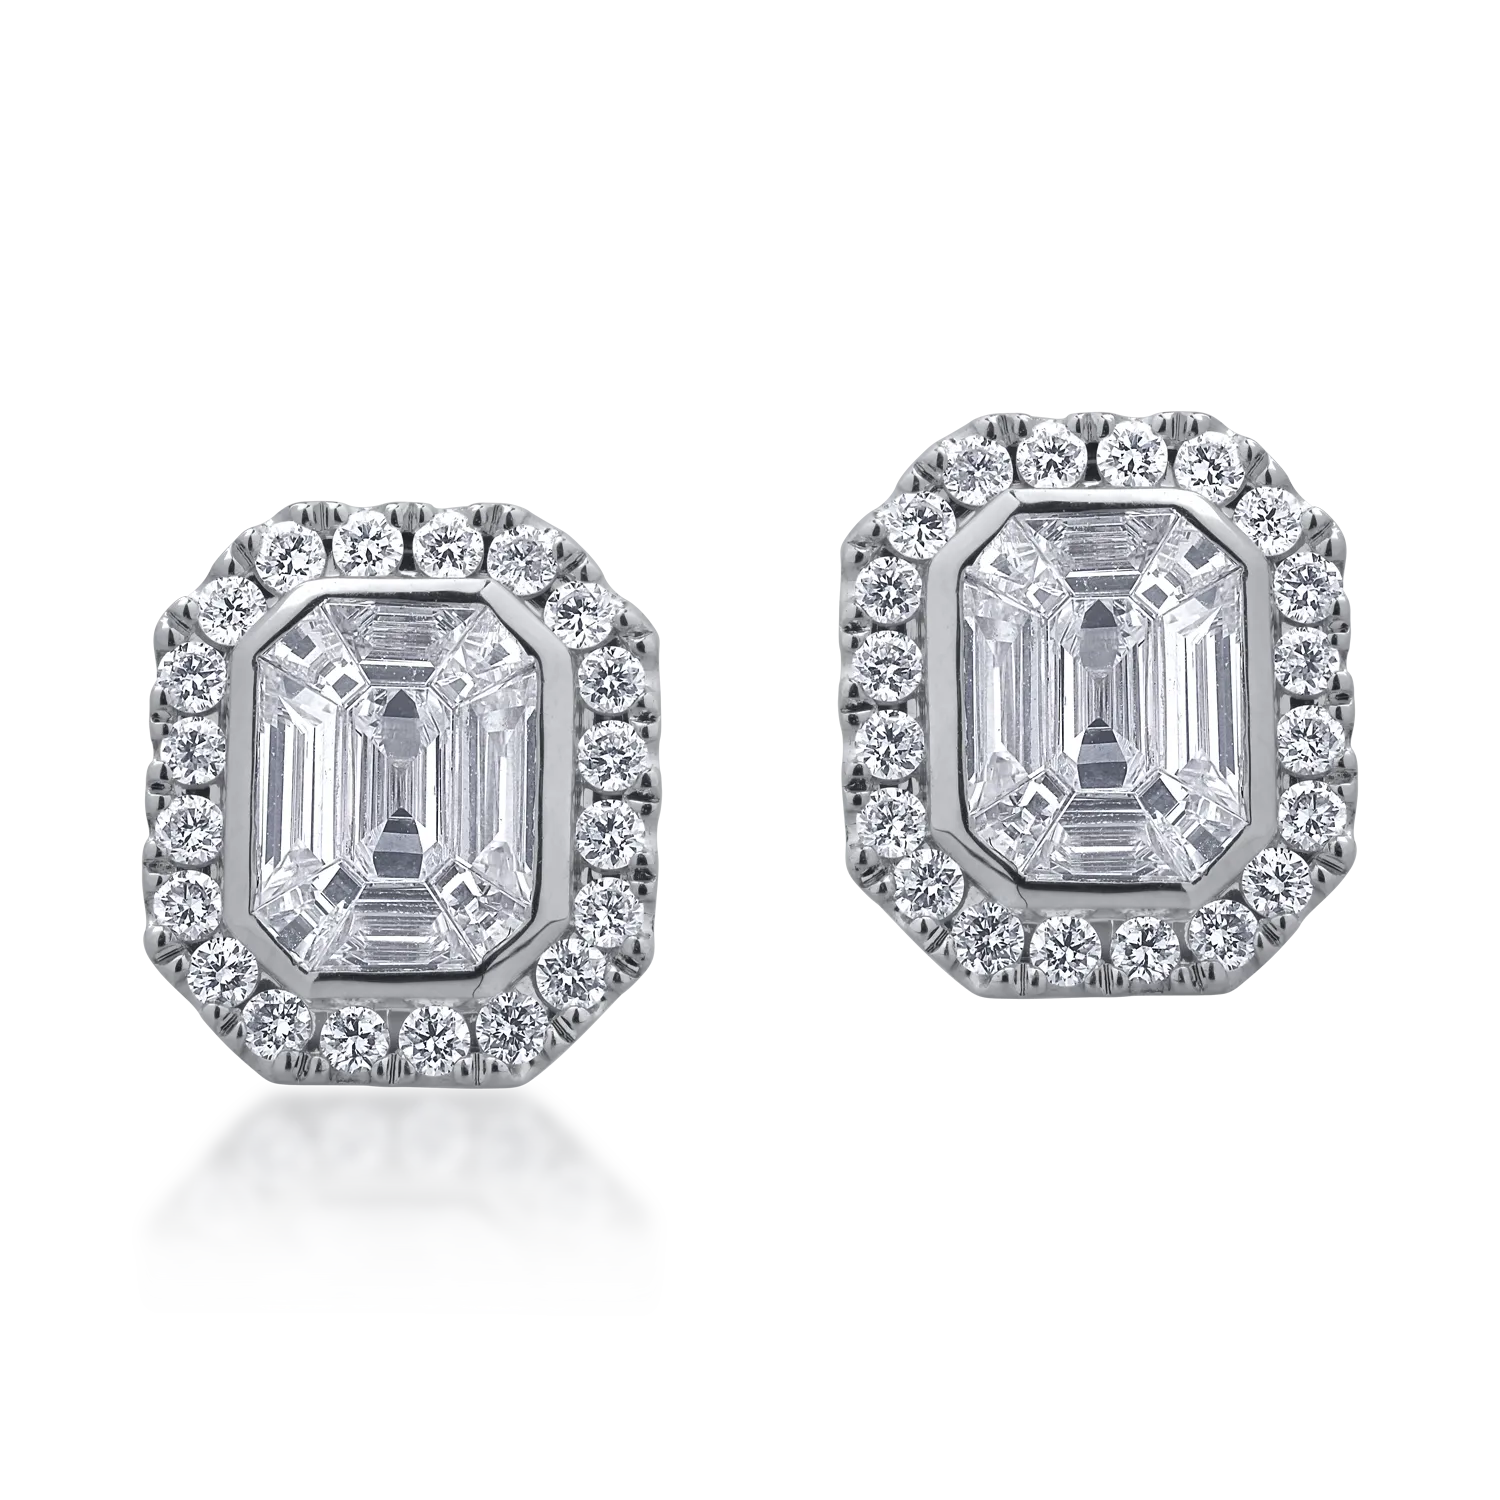 18K white gold earrings with 1.09ct diamonds